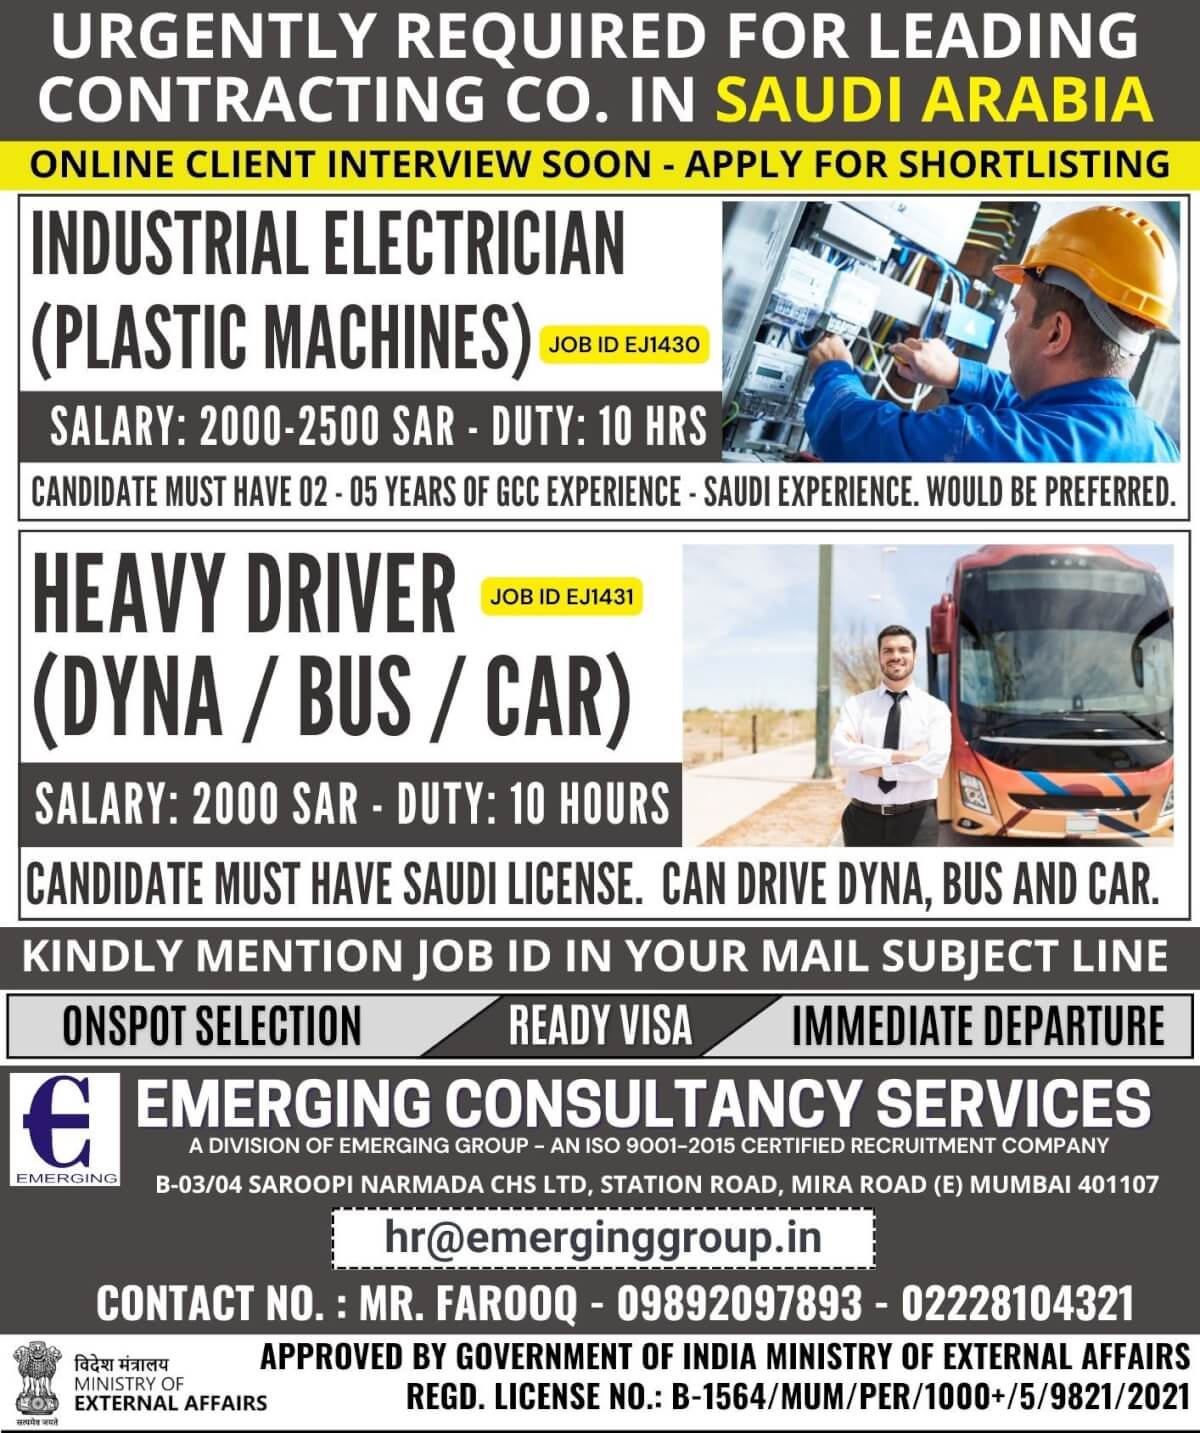 URGENTLY REQUIRED FOR LEADING CONTRACTING COMPANY IN SAUDI ARABIA